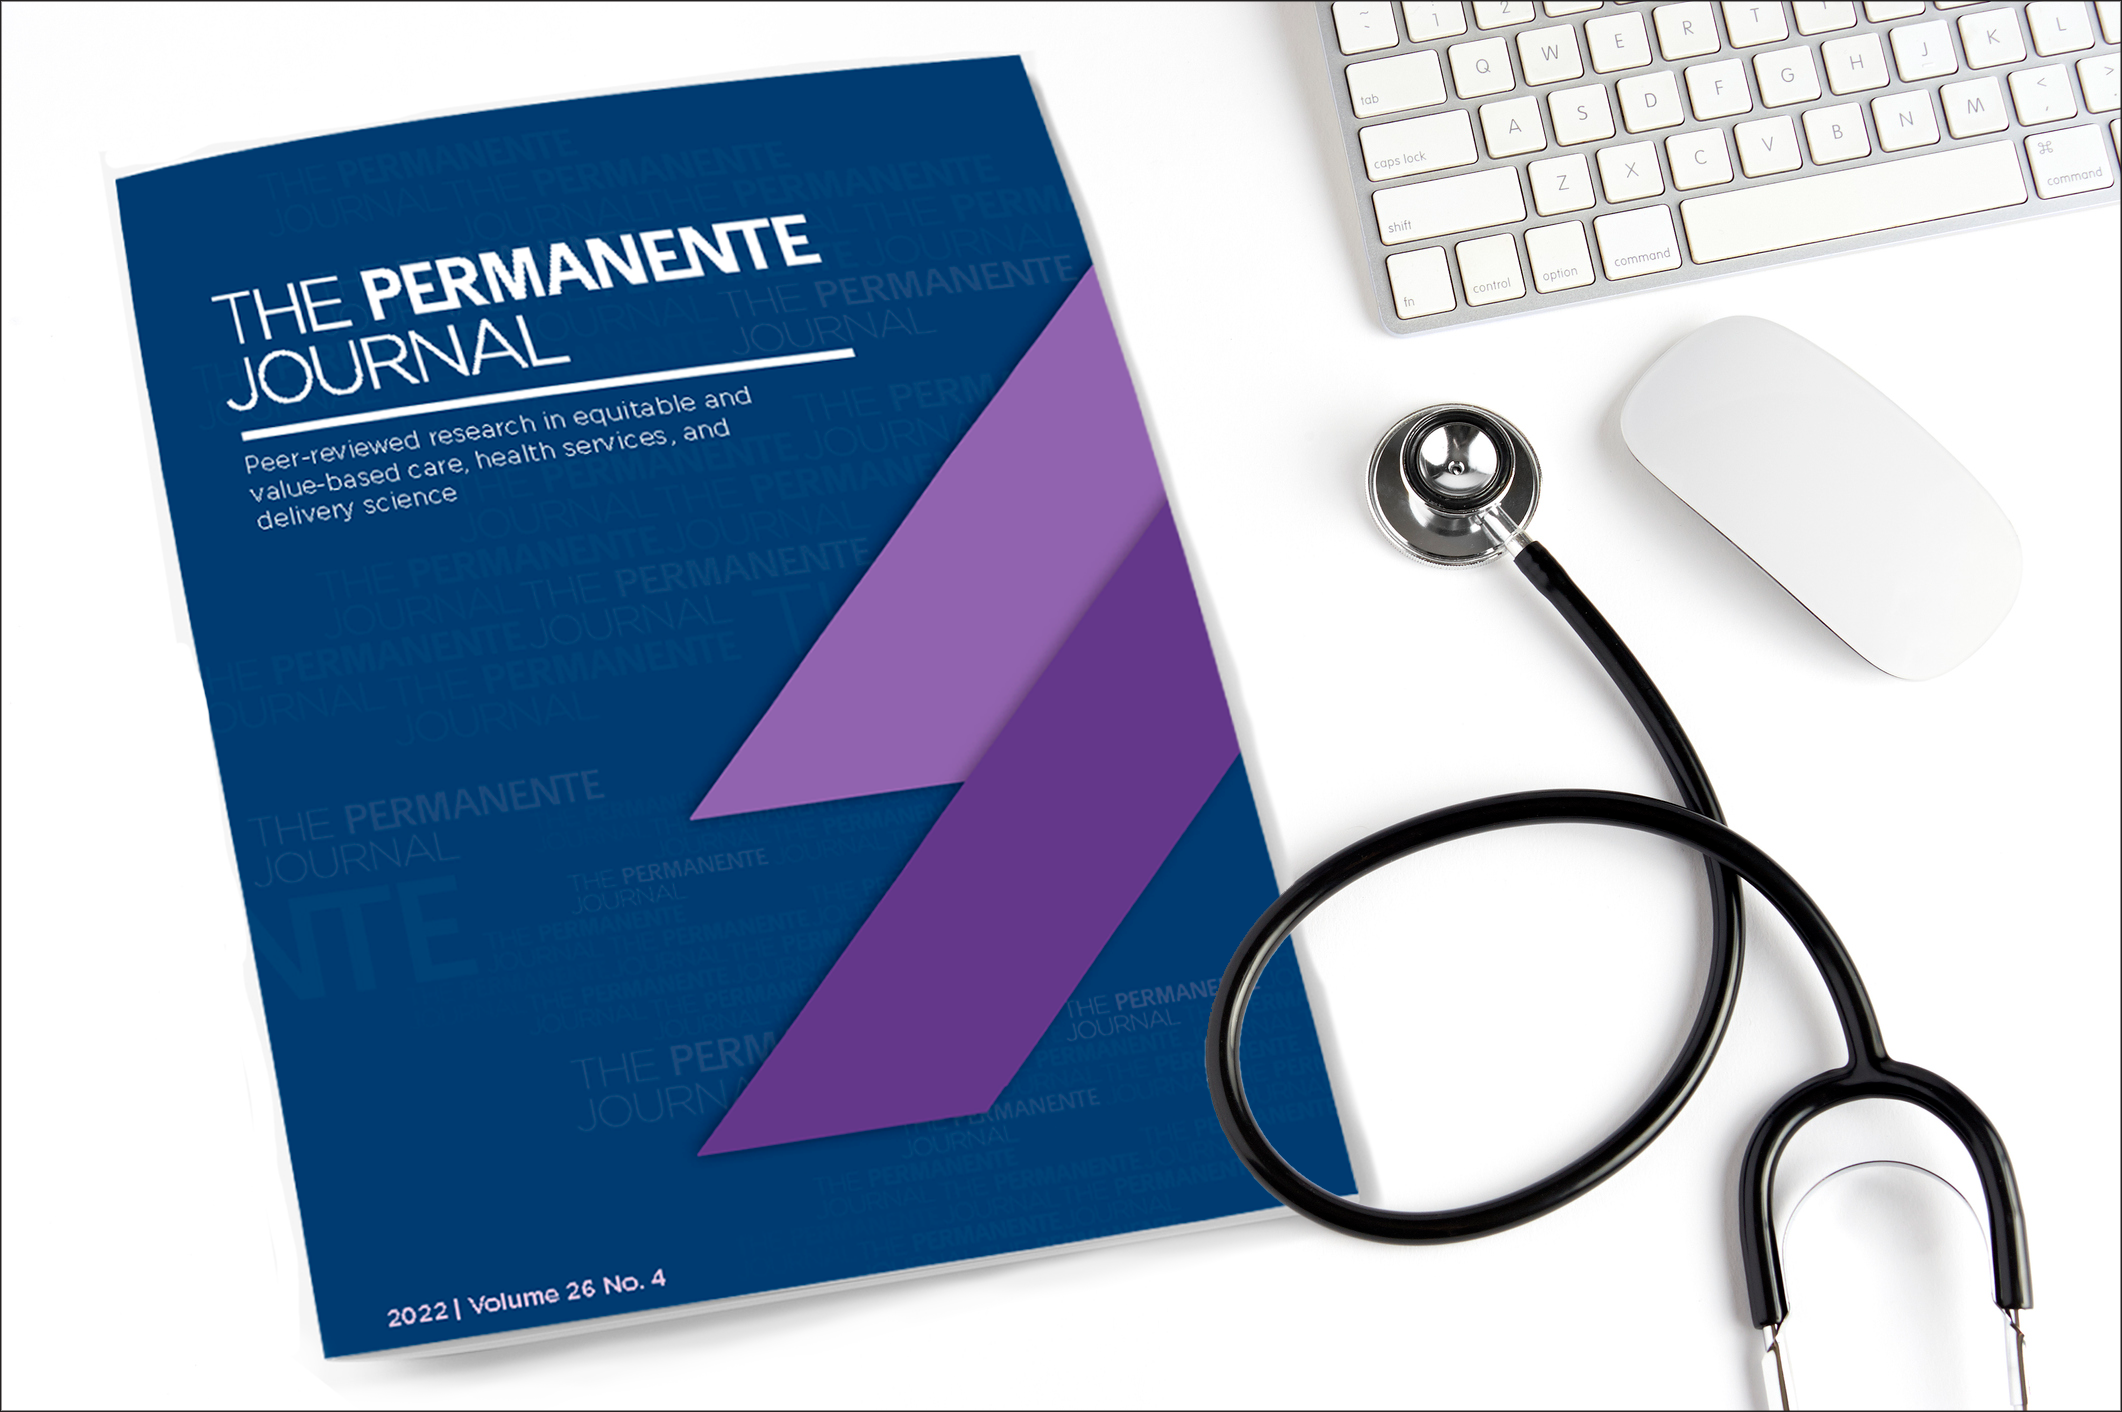 Self-described 'knowledge-seeker' leads relaunch of The Permanente Journal  - Permanente Medicine